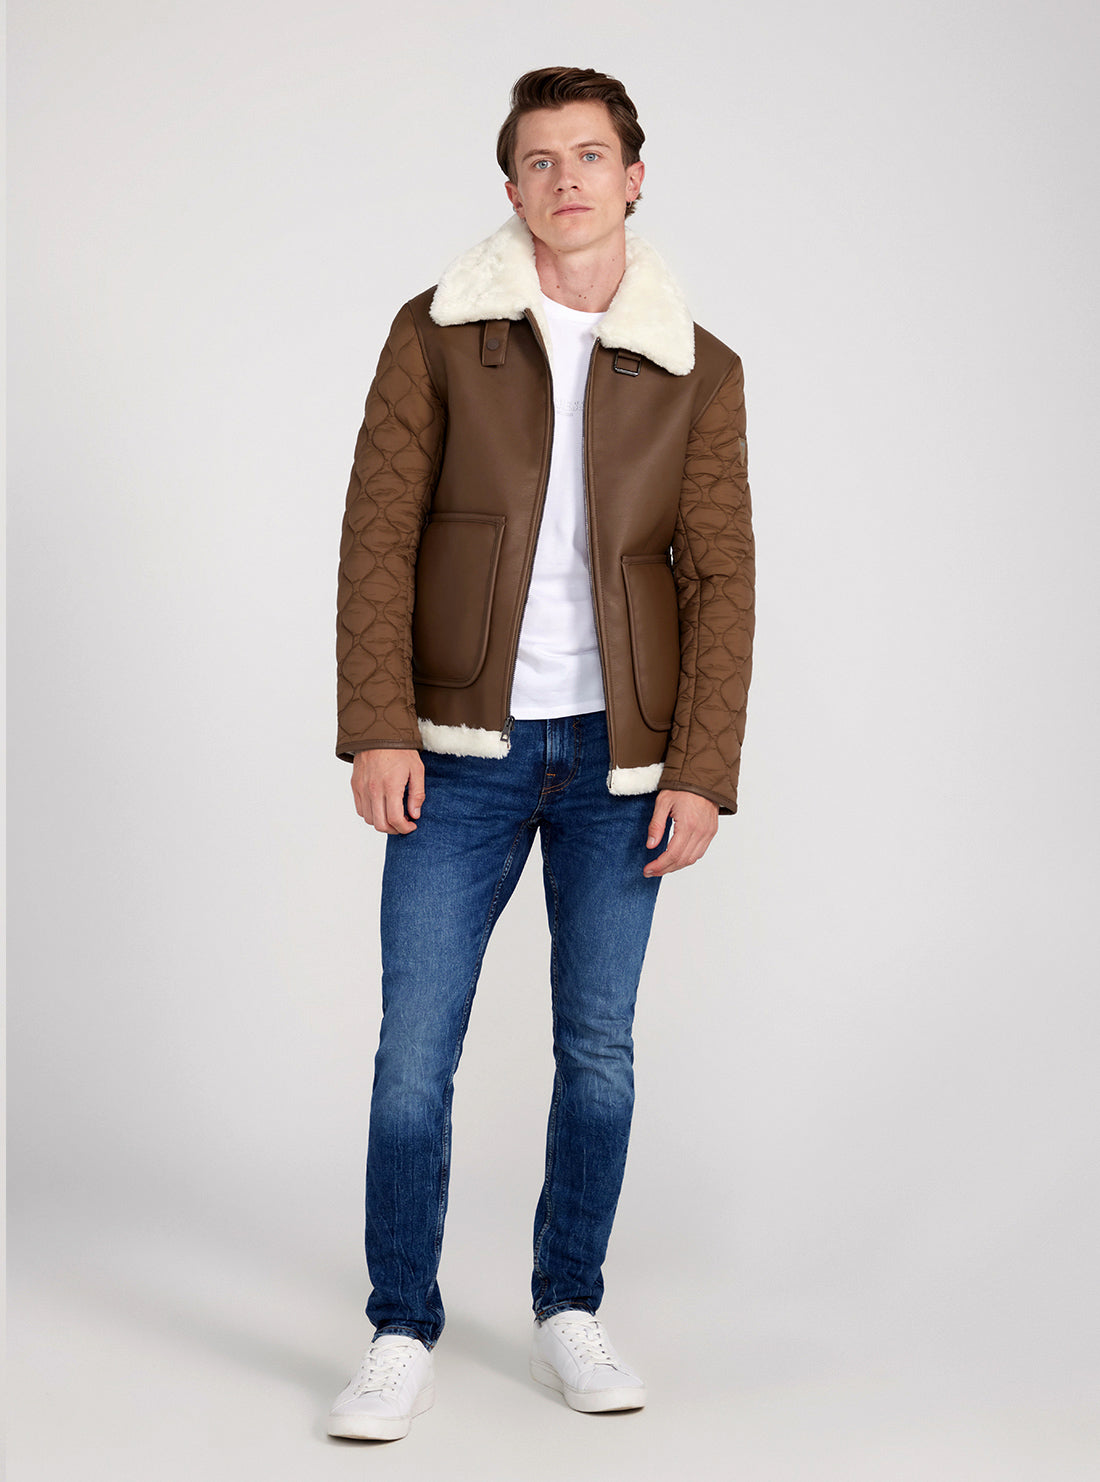 GUESS Brown Shearling Look Jacket full view